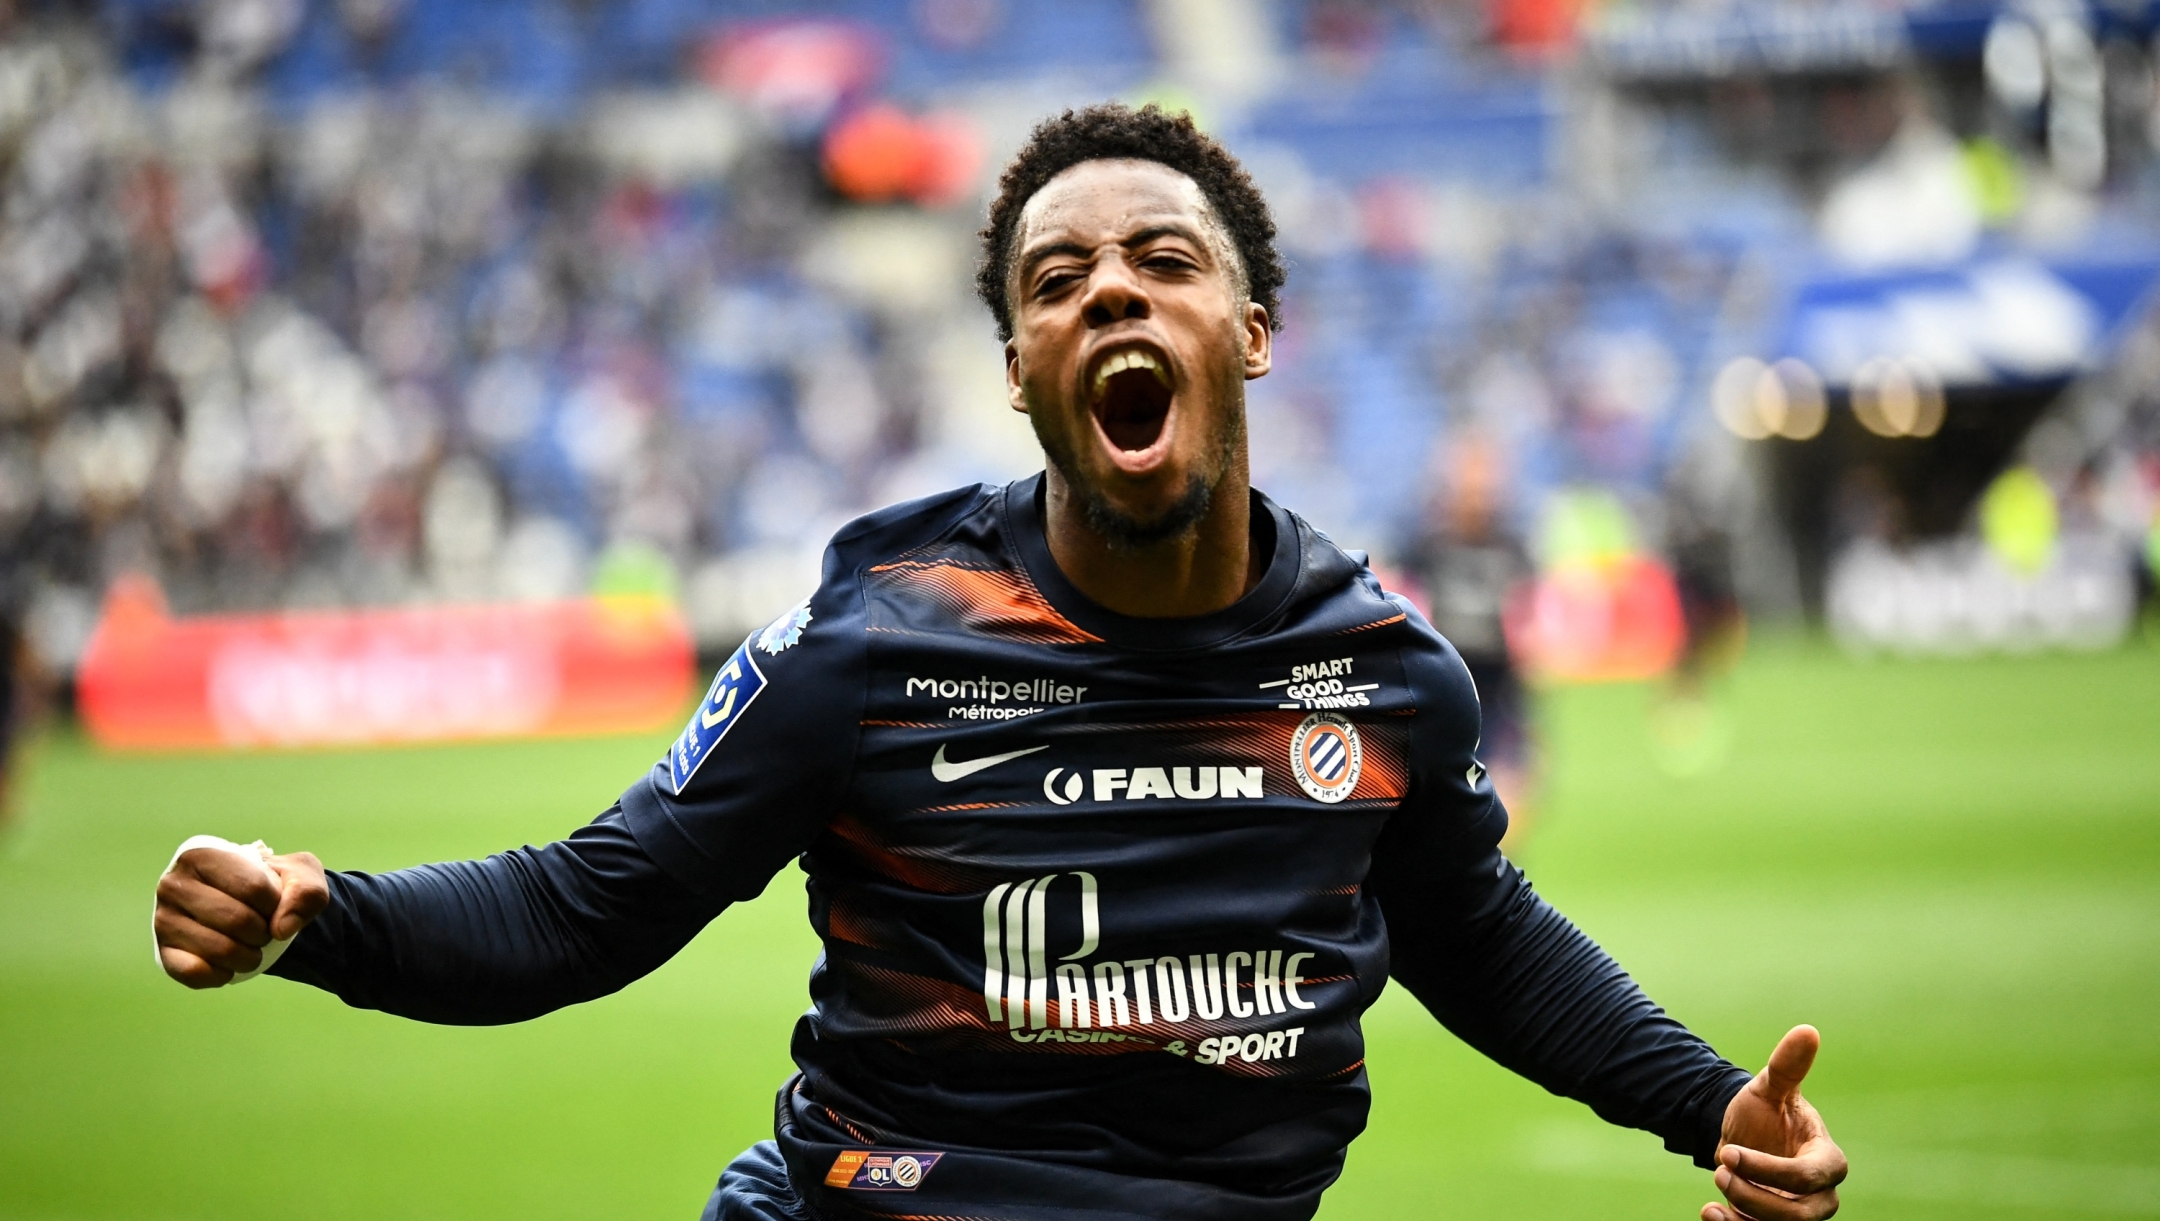 Montpellier's French forward Elye Wahi celebrates scoring his team's first goal during the French L1 football match between Olympique Lyonnais (OL) and Montpellier Herault SC at The Groupama Stadium in Decines-Charpieu, central-eastern France on May 7, 2023. (Photo by OLIVIER CHASSIGNOLE / AFP)